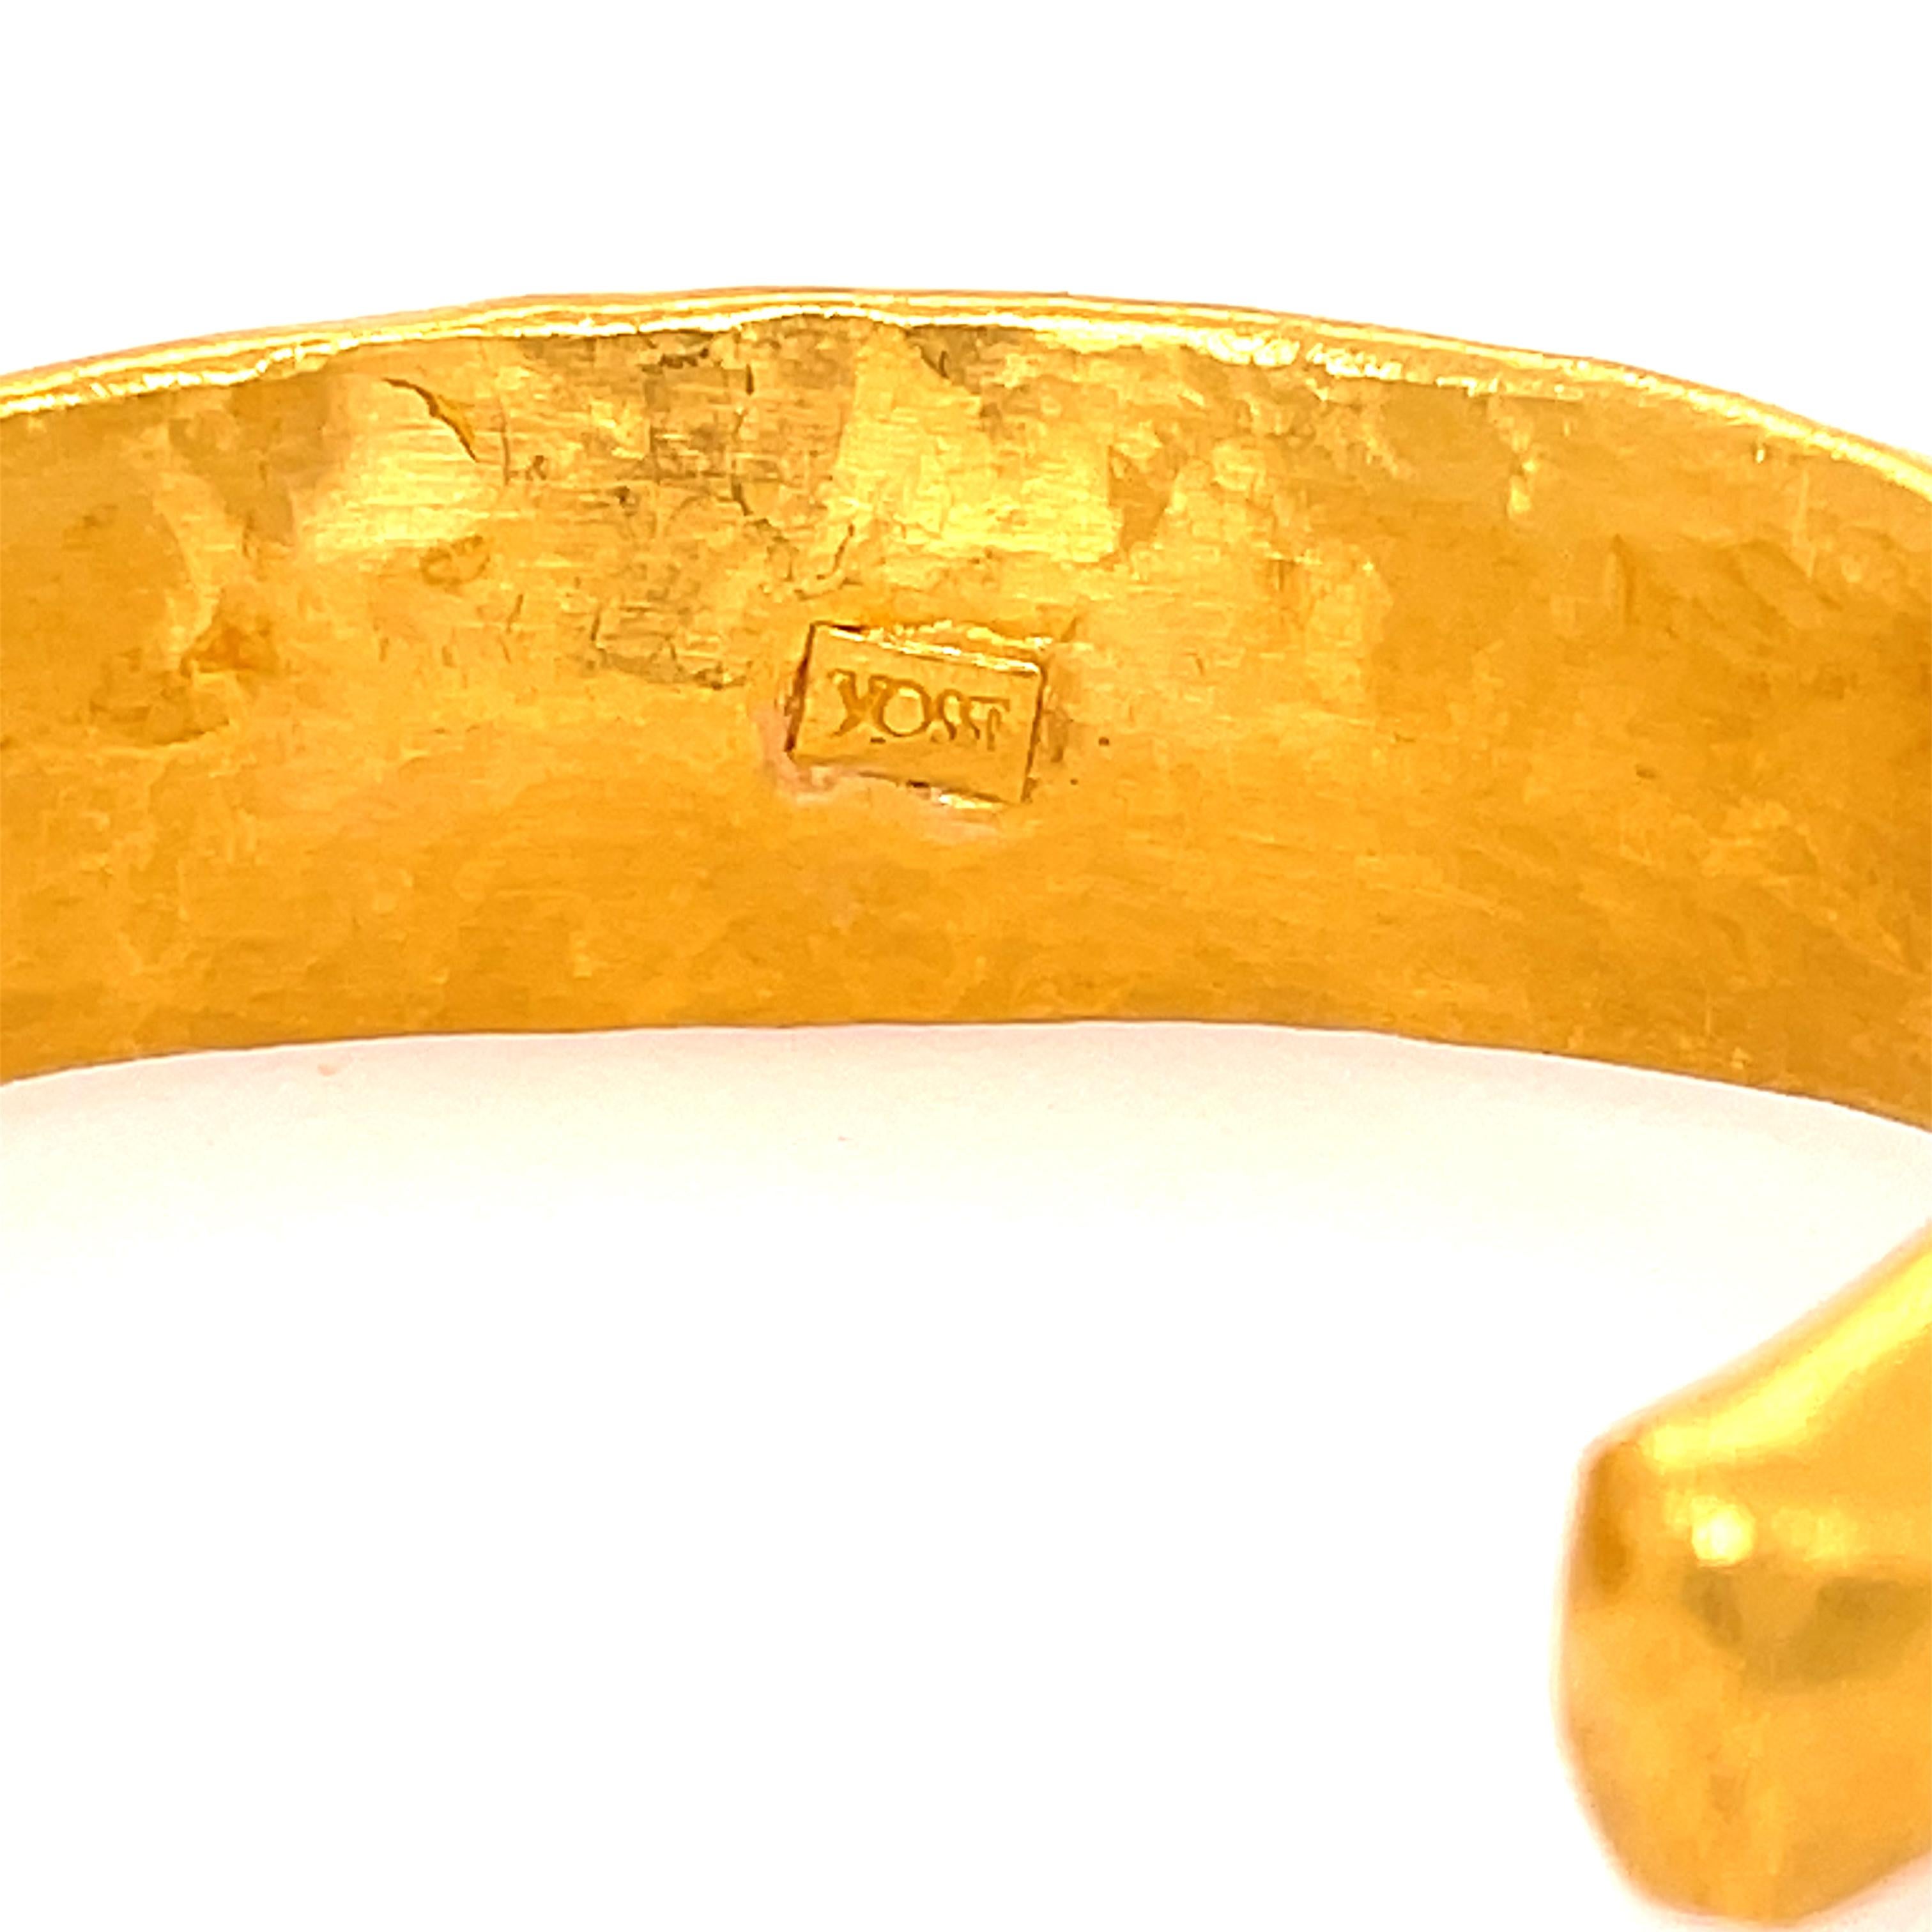 Yossi Harari cuff in 24k yellow gold. This cuff is for an extra small wrist, the circumference measures 5.5 inches.

62.4 grams

Stamped Yossi